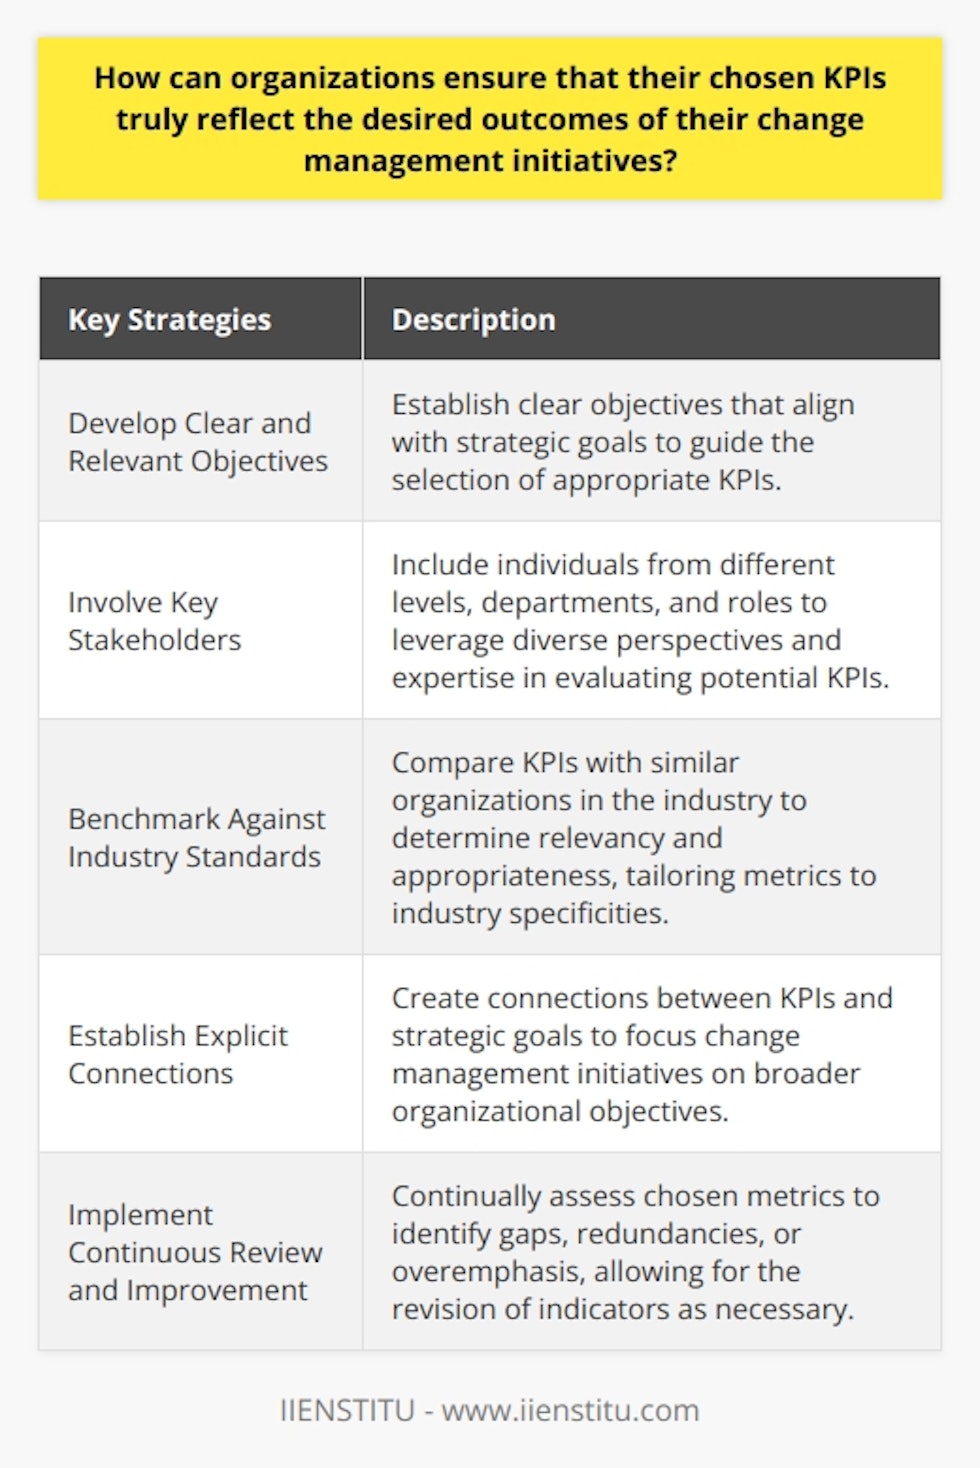 When it comes to change management initiatives, selecting the right key performance indicators (KPIs) is crucial for organizations to accurately gauge the desired outcomes. Here are some effective ways organizations can ensure that their chosen KPIs truly reflect the desired outcomes of their change management initiatives.First and foremost, organizations must develop clear and relevant objectives that align with their overall strategic goals. This establishes a framework to guide the selection of appropriate KPIs. Without clear objectives, it becomes challenging to choose relevant metrics that accurately measure the desired outcomes.Involving key stakeholders in the process of selecting KPIs is essential for improved alignment with desired outcomes. By including individuals from various levels, departments, and roles within the organization, organizations can leverage diverse perspectives and expertise. This helps in evaluating potential KPIs more effectively, resulting in a more accurate reflection of desired outcomes.Benchmarking KPIs against industry standards is another effective strategy. By comparing KPIs with those of similar organizations in the industry, organizations can determine their relevancy and appropriateness. This helps in tailoring the chosen metrics to the specificities of the industry, increasing the likelihood that they reflect the desired outcomes.To ensure alignment with the desired outcomes, organizations should establish explicit connections between KPIs and strategic goals. By doing so, change management initiatives are focused on achieving broader organizational objectives, rather than solely focusing on limited performance metrics. This alignment ensures that the selected KPIs are truly reflective of the desired outcomes.Implementing a system of continuous review and improvement is crucial to evaluate and refine KPIs as necessary. Organizations should continually assess their chosen metrics to identify any gaps, redundancies, or overemphasis on certain aspects of performance. This allows them to revise their indicators to more accurately reflect their desired outcomes.In summary, organizations can ensure that their chosen KPIs genuinely reflect the desired outcomes of their change management initiatives by selecting relevant metrics, involving key stakeholders, aligning with industry standards, linking KPIs to strategic goals, and implementing a system of continuous review and improvement. By following these strategies, organizations can effectively measure progress towards their overarching strategic objectives.